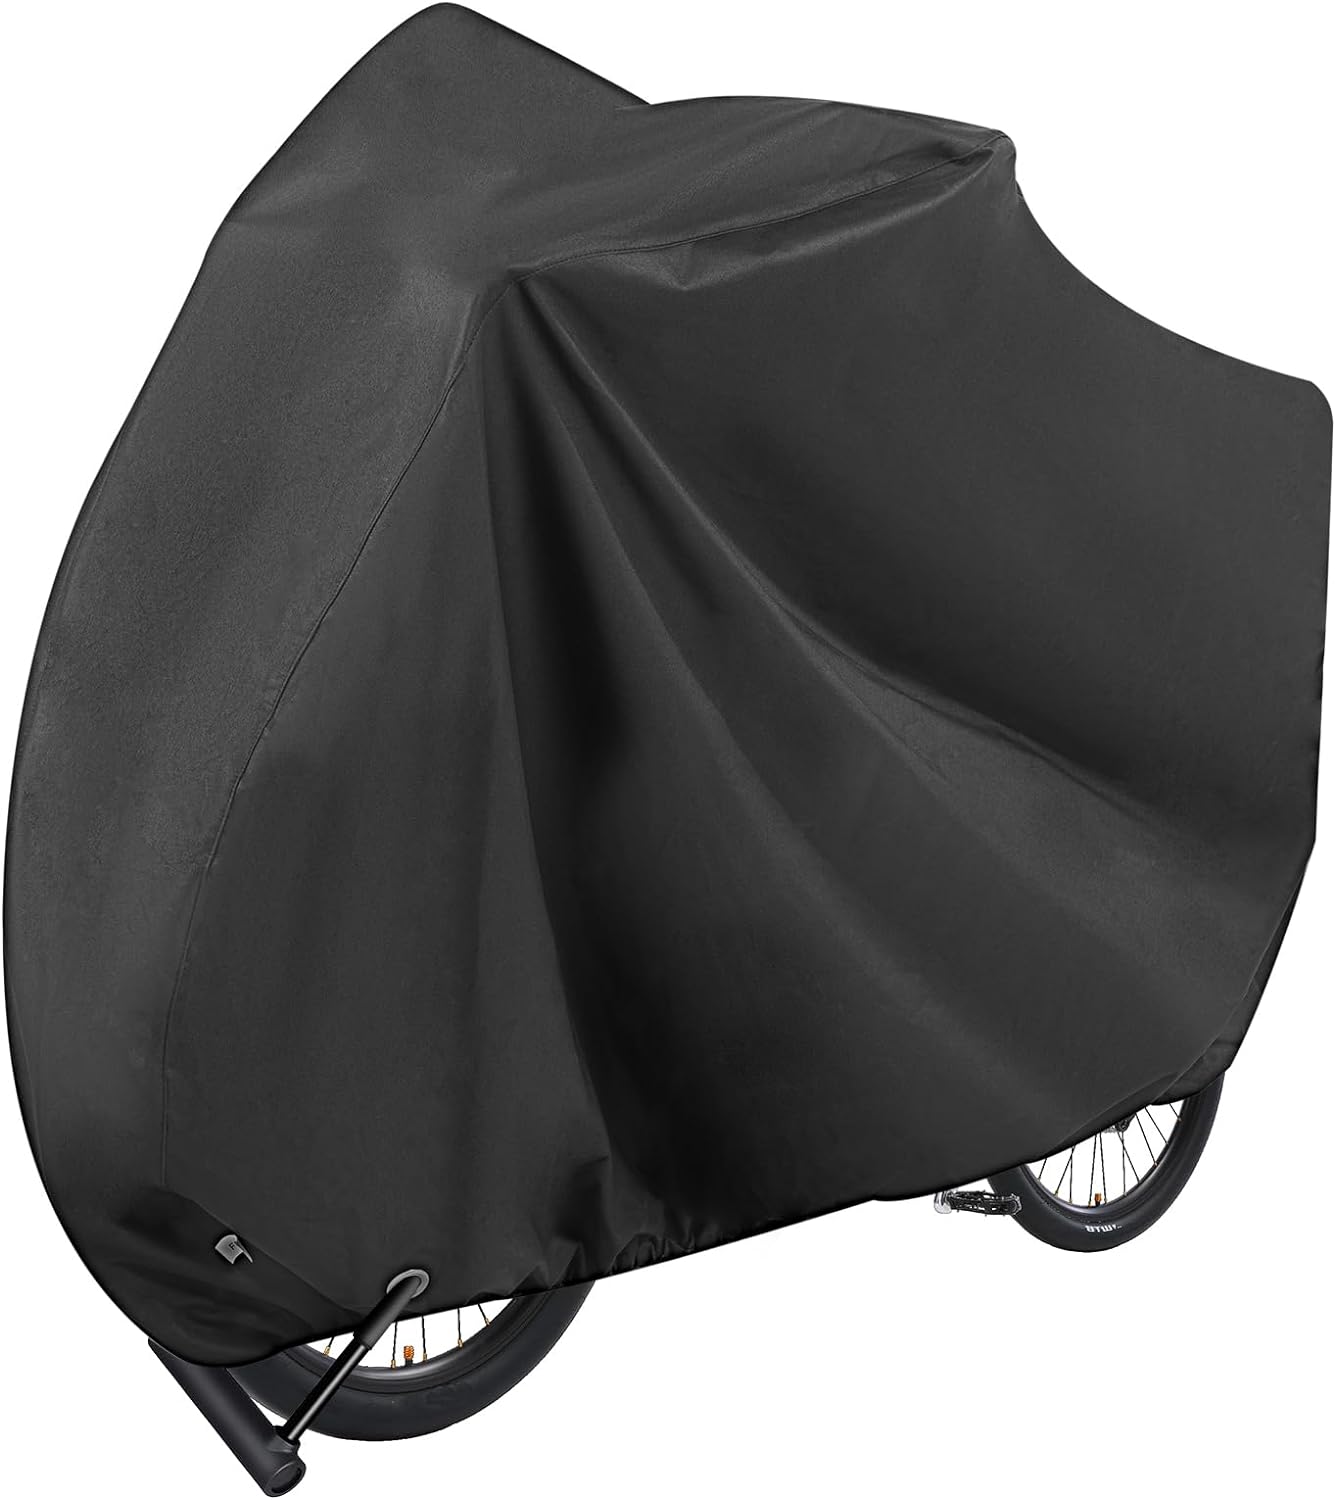 Heavy Duty Bicycle Covers - Waterproof Mountain Bike Cover | Shop Now ...